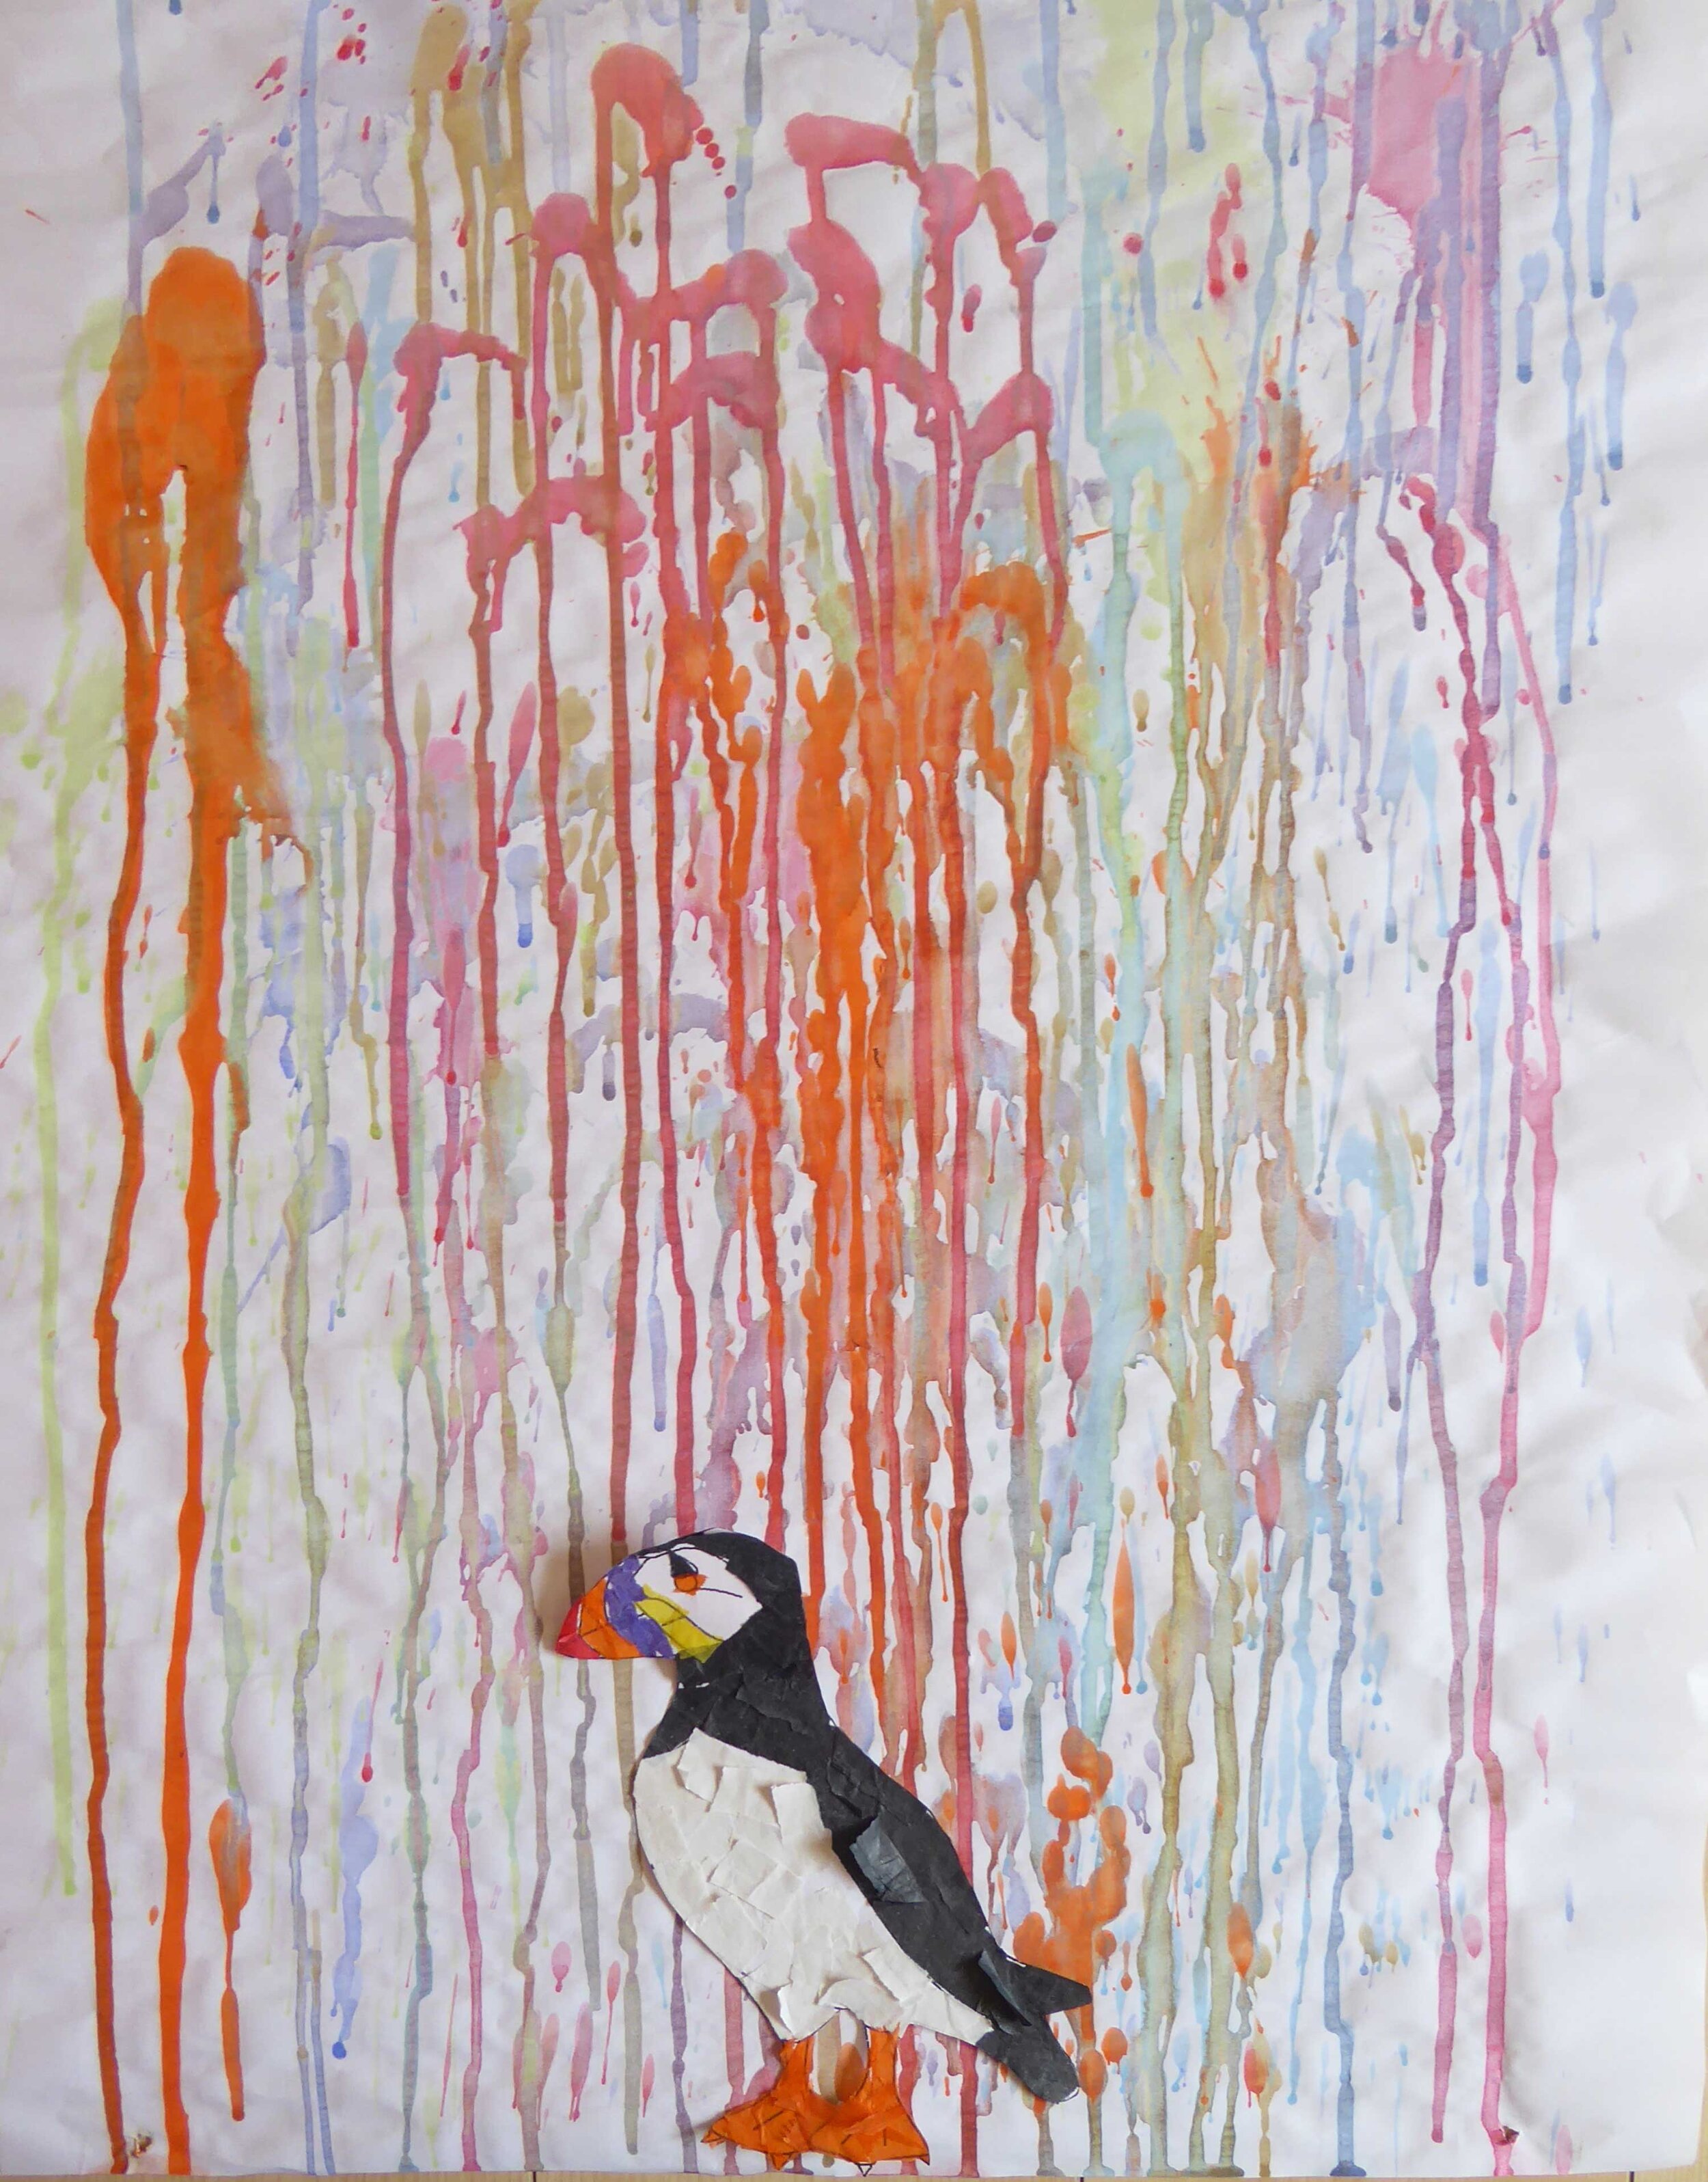 Puffin Shower by Erland Sclater age6